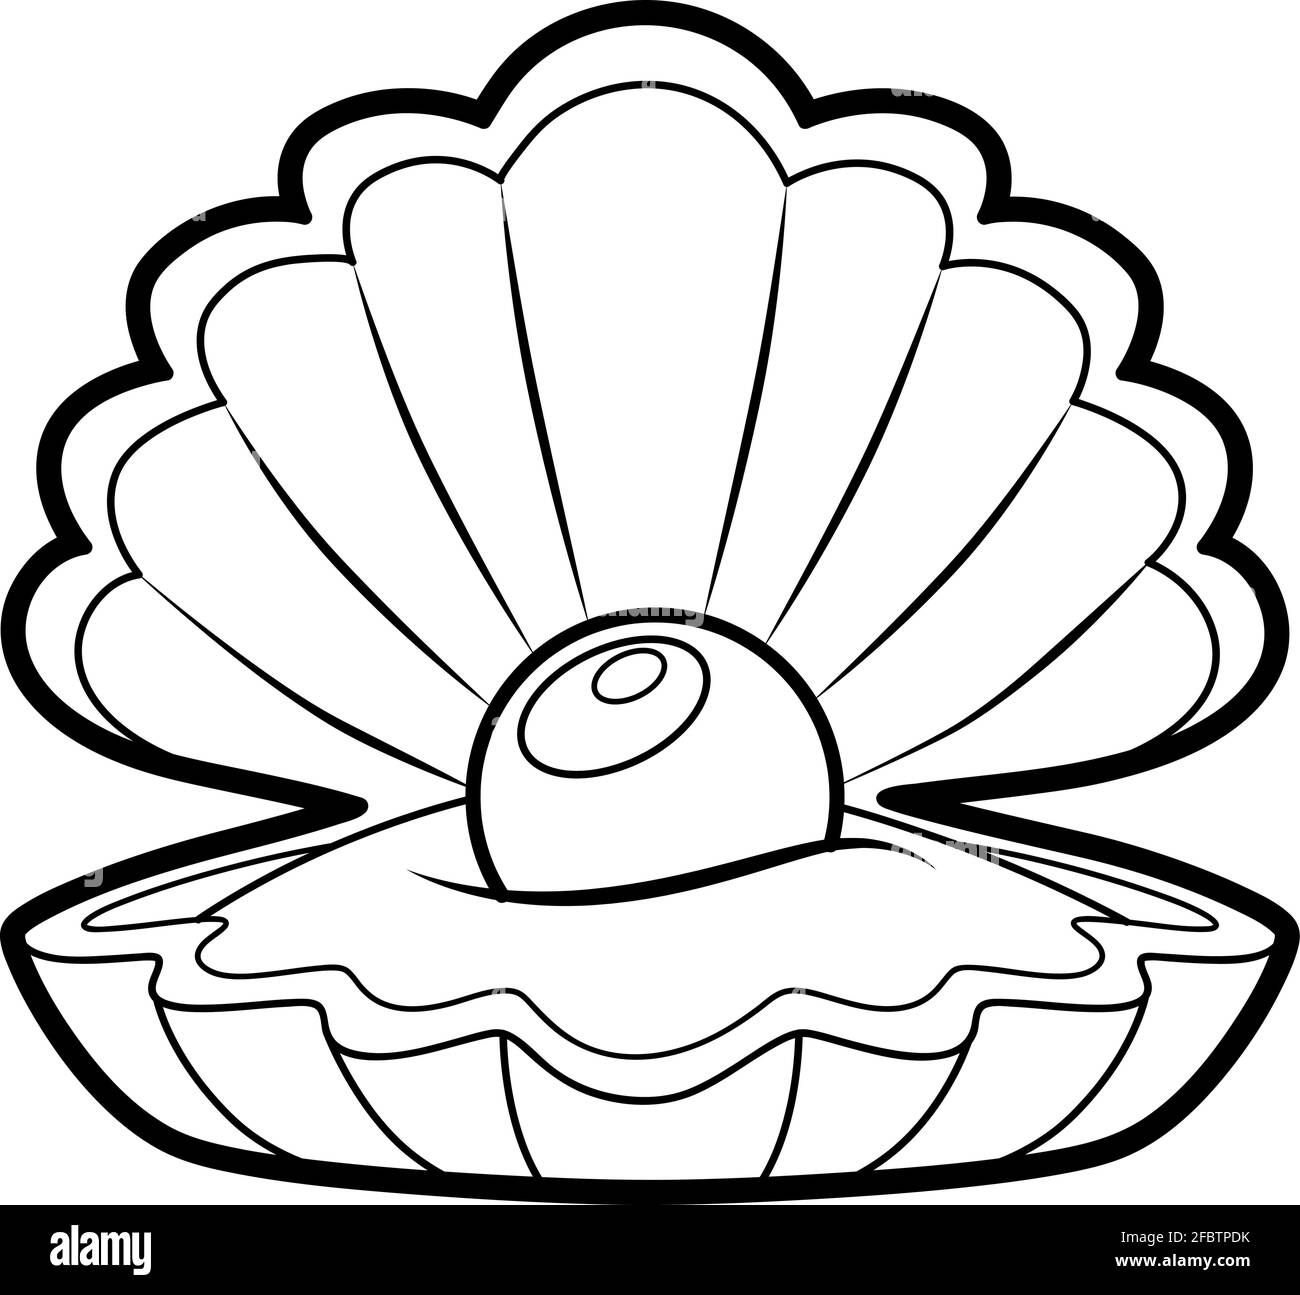 Coloring book or page for kids shell black and white vector illustration stock vector image art